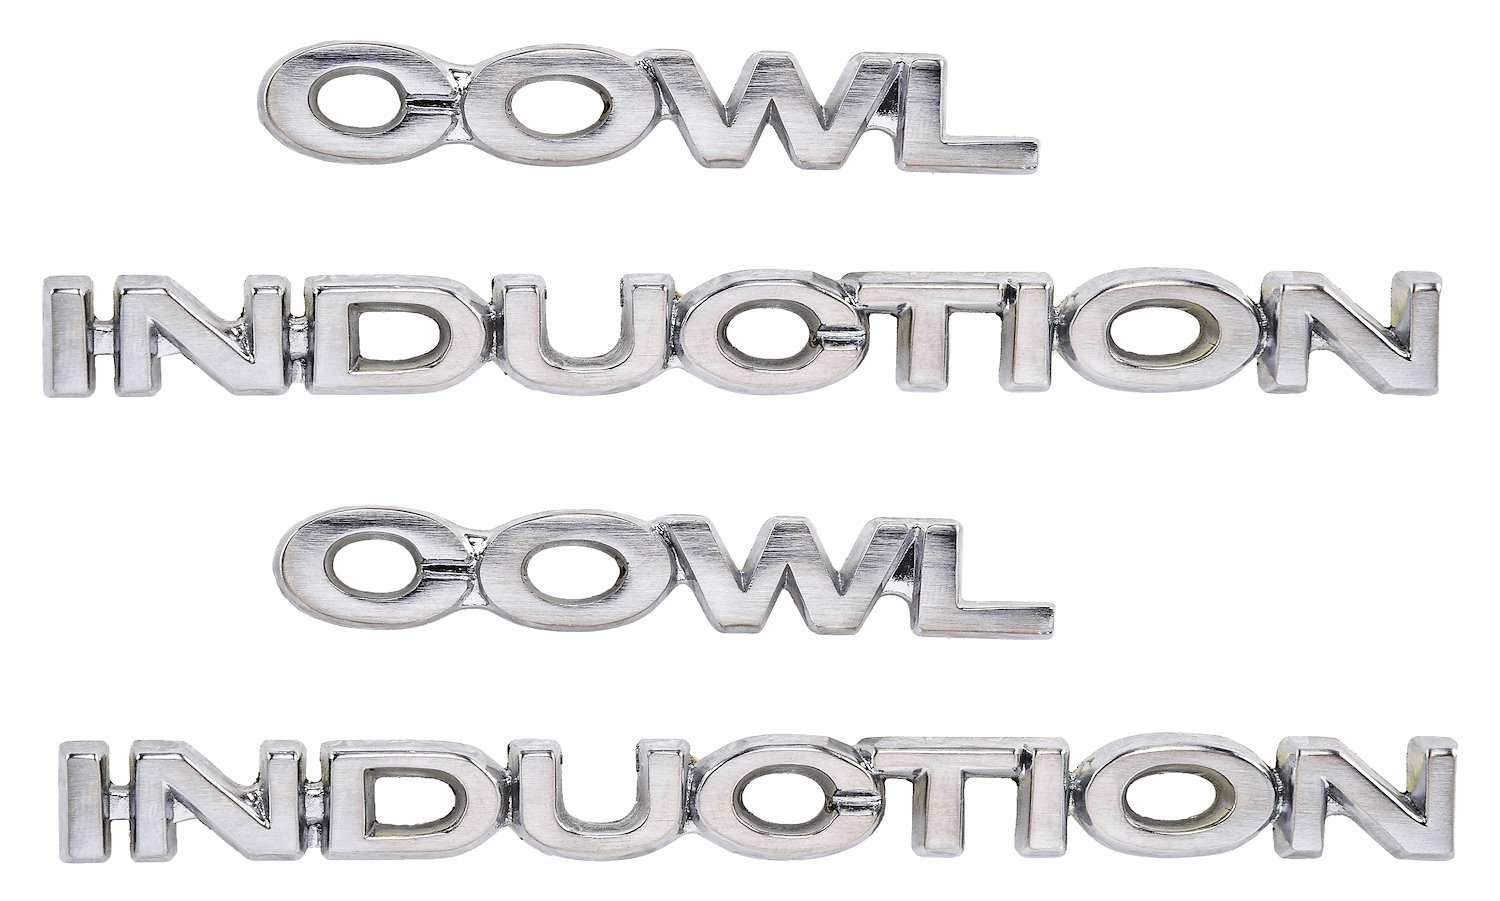 Cowl Induction Hood Emblems for 1970-1972 Chevrolet Chevelle,